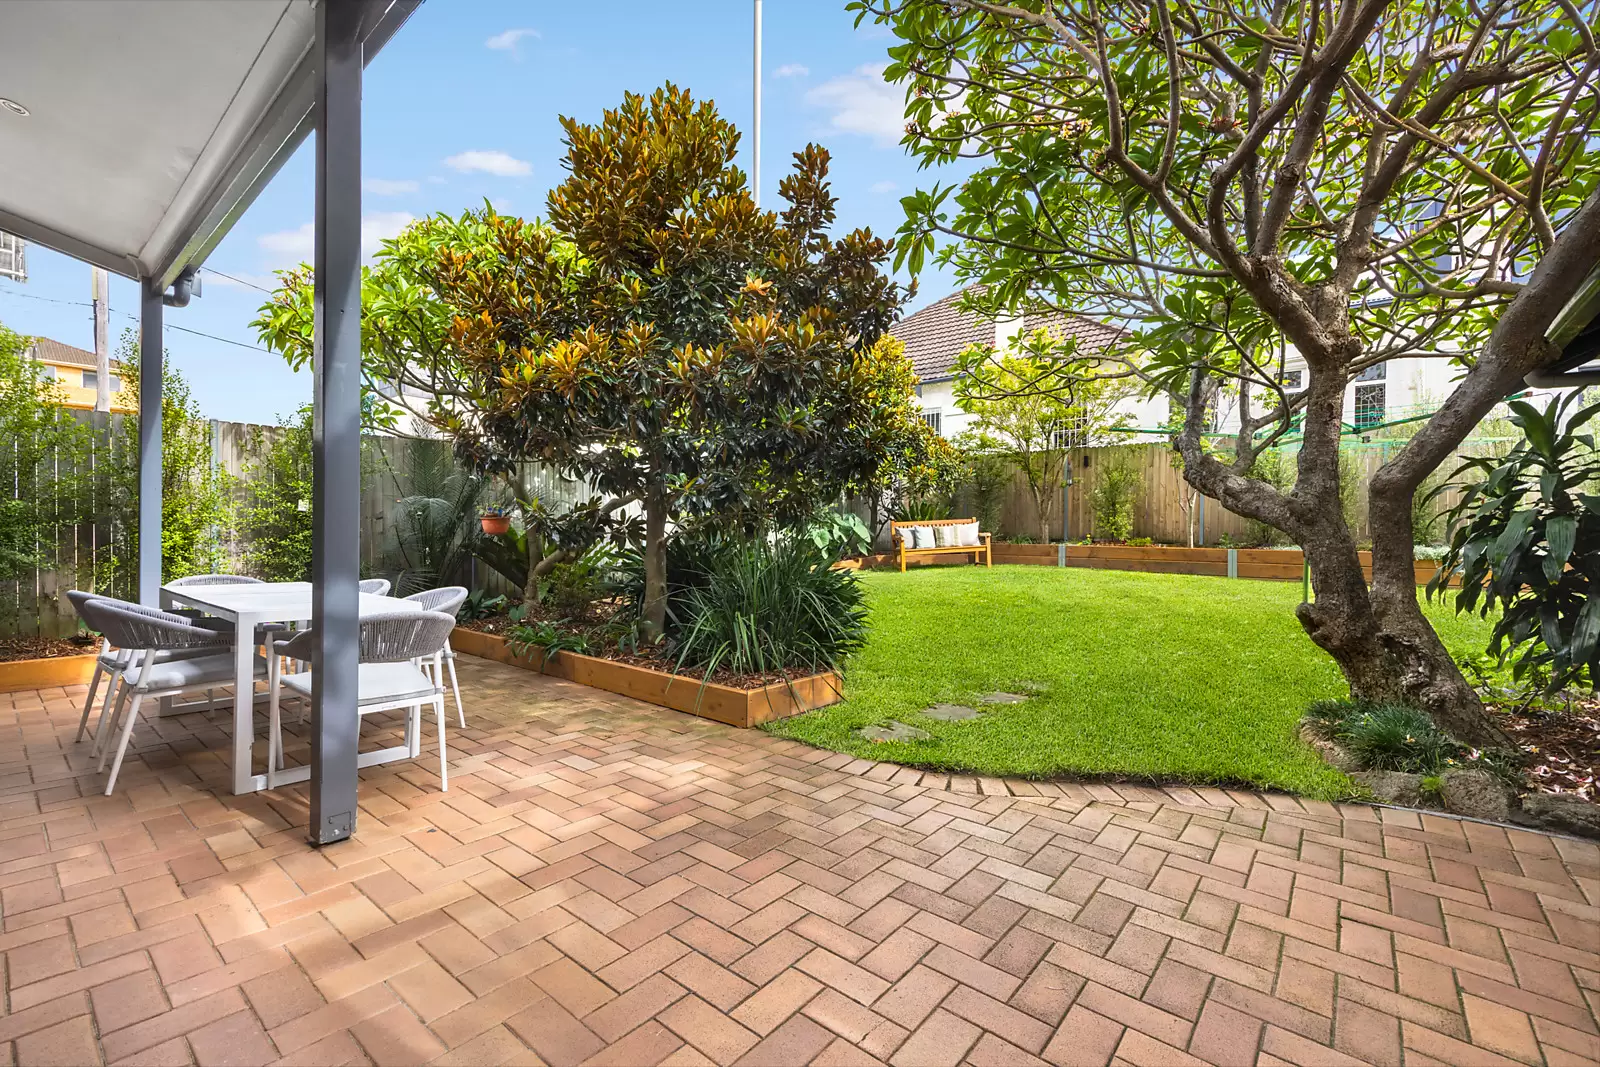 Photo #8: 27 Carr Street, Coogee - Auction by Sydney Sotheby's International Realty